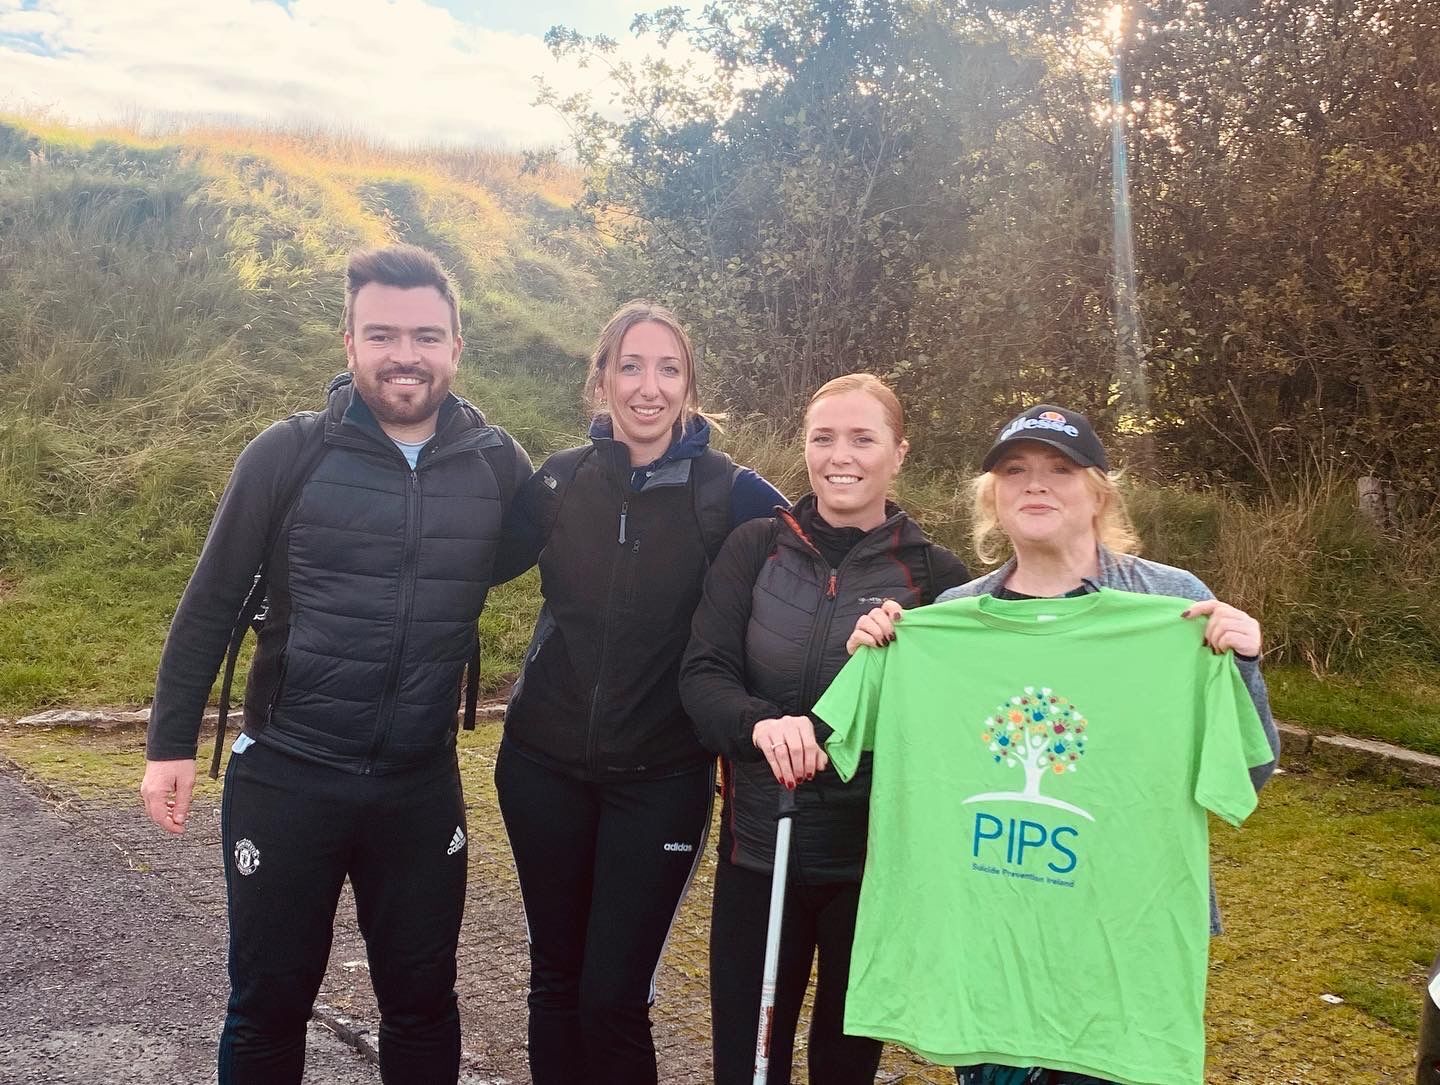 Honeycomb Completes Charity Hike for PIPS Suicide Prevention